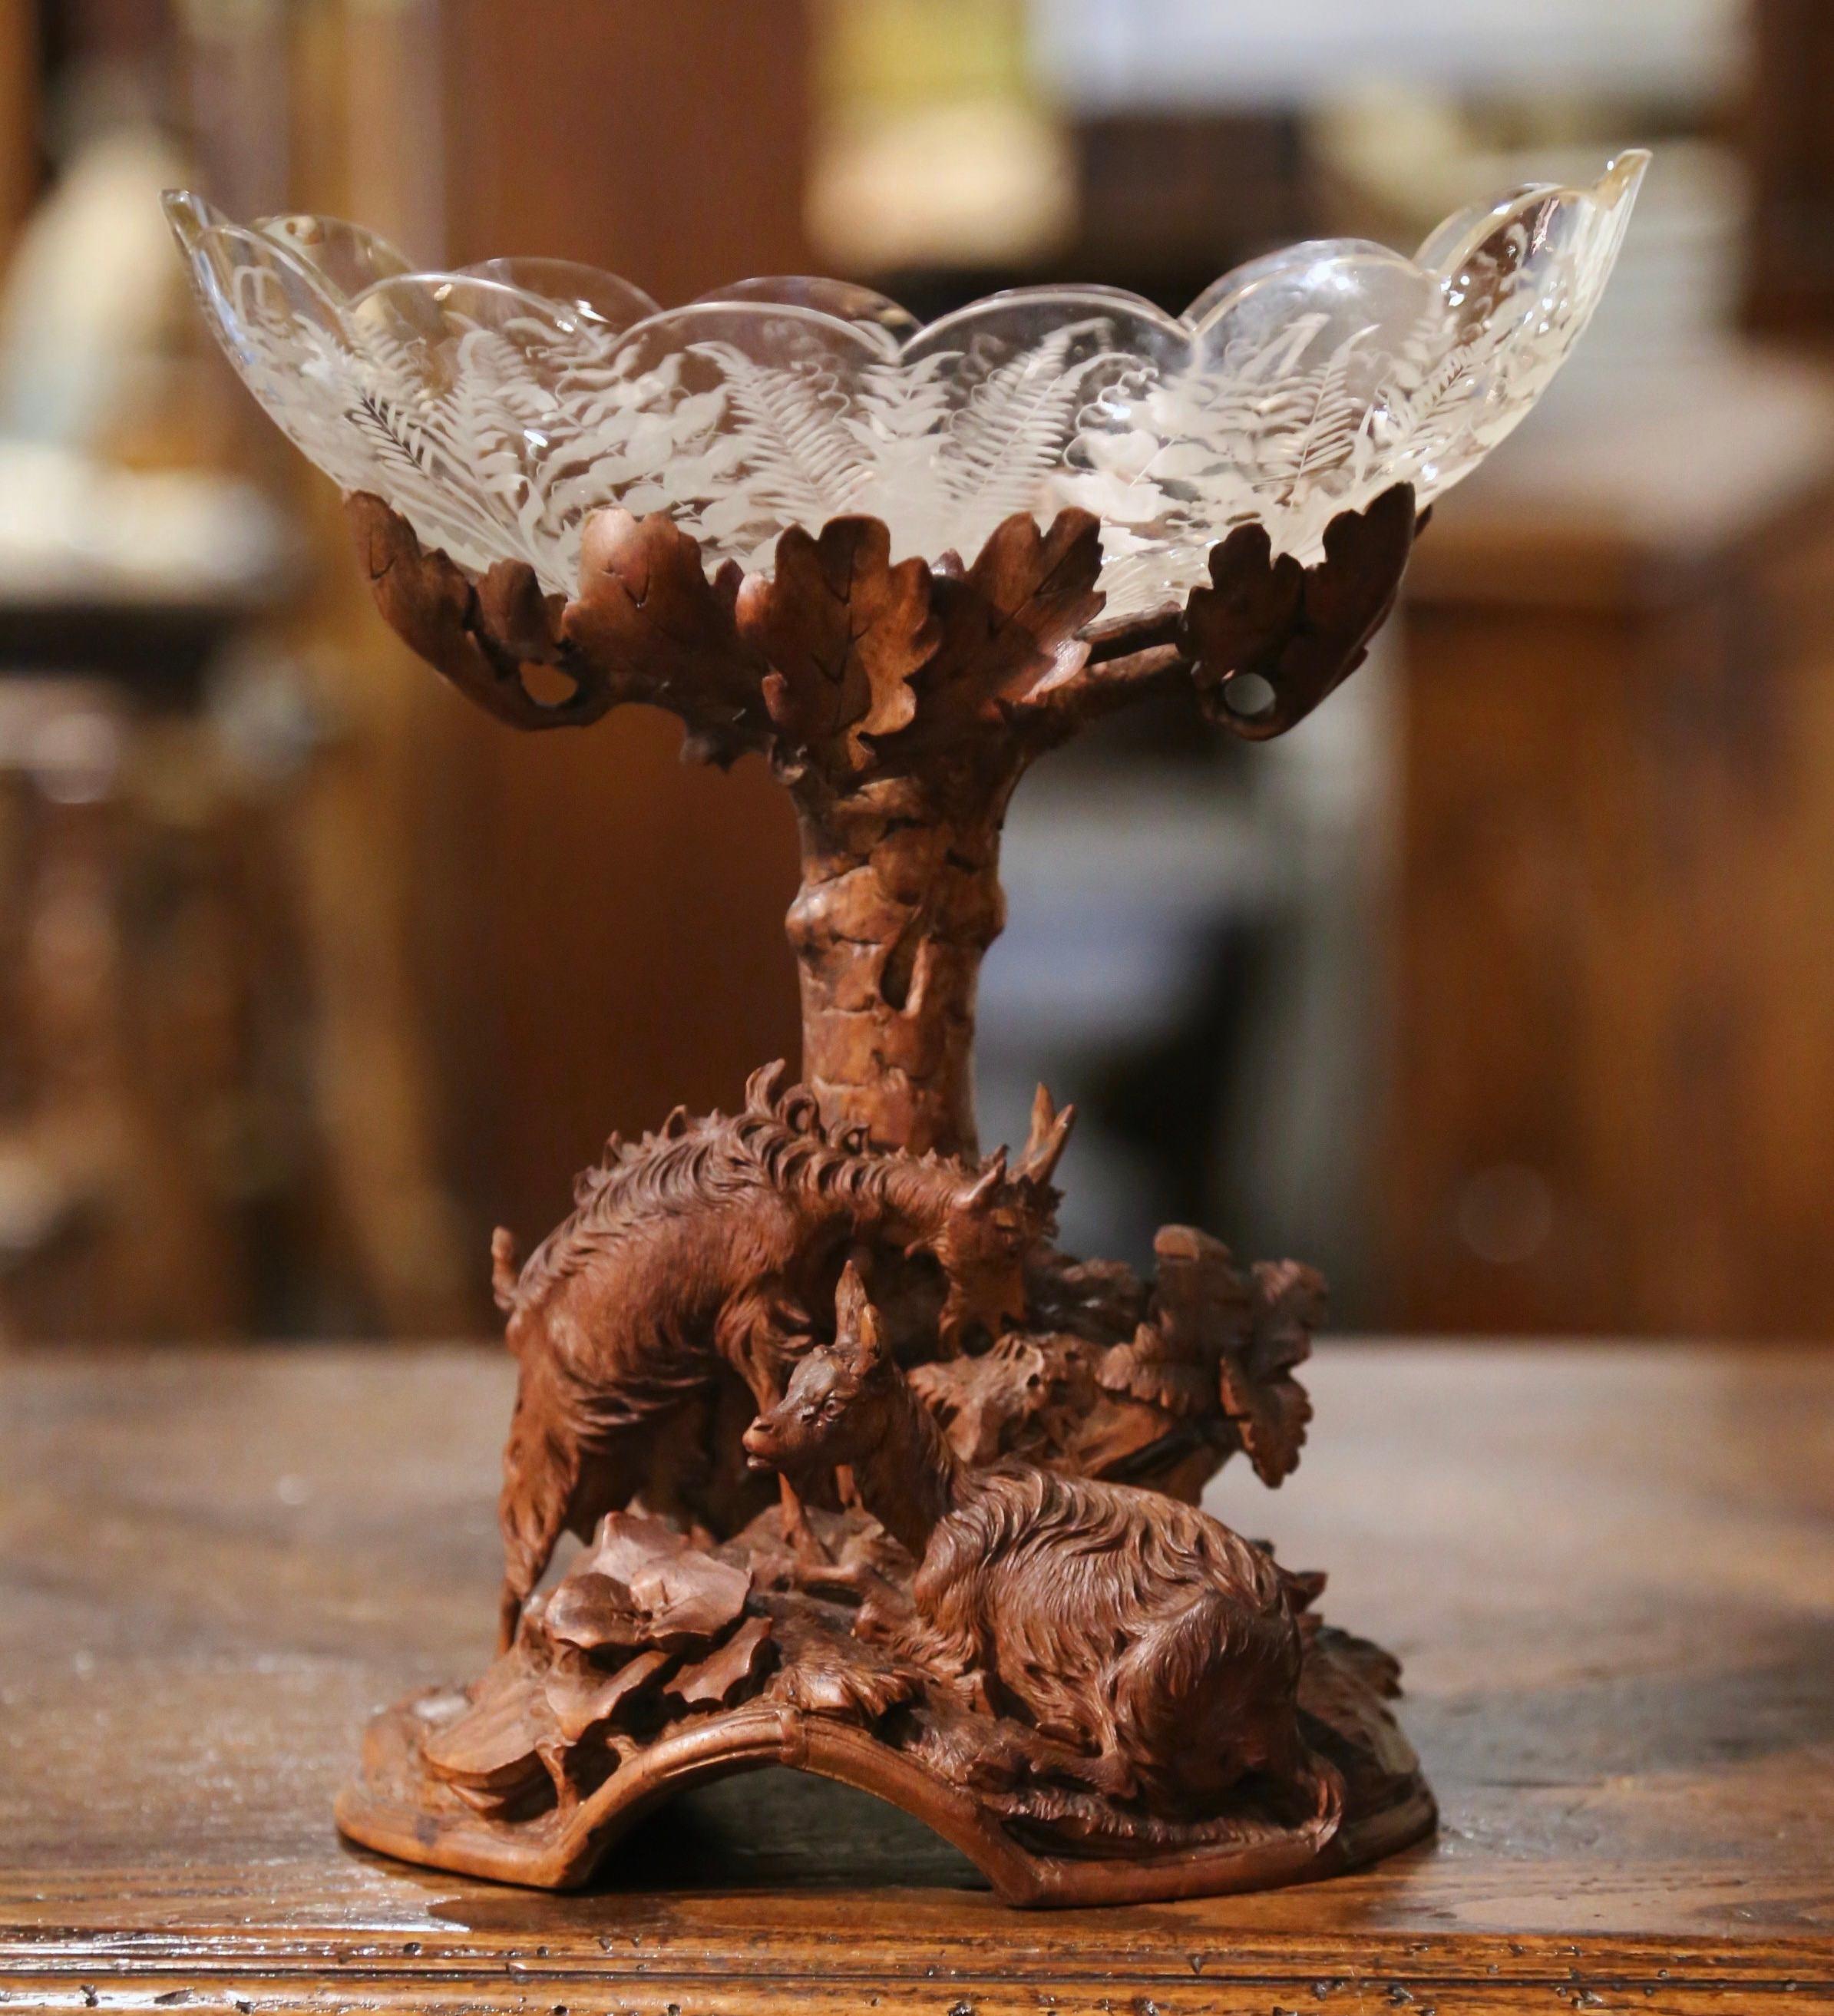 19th Century Black Forest Carved Walnut and Crystal Center Piece with Goat Decor In Excellent Condition For Sale In Dallas, TX